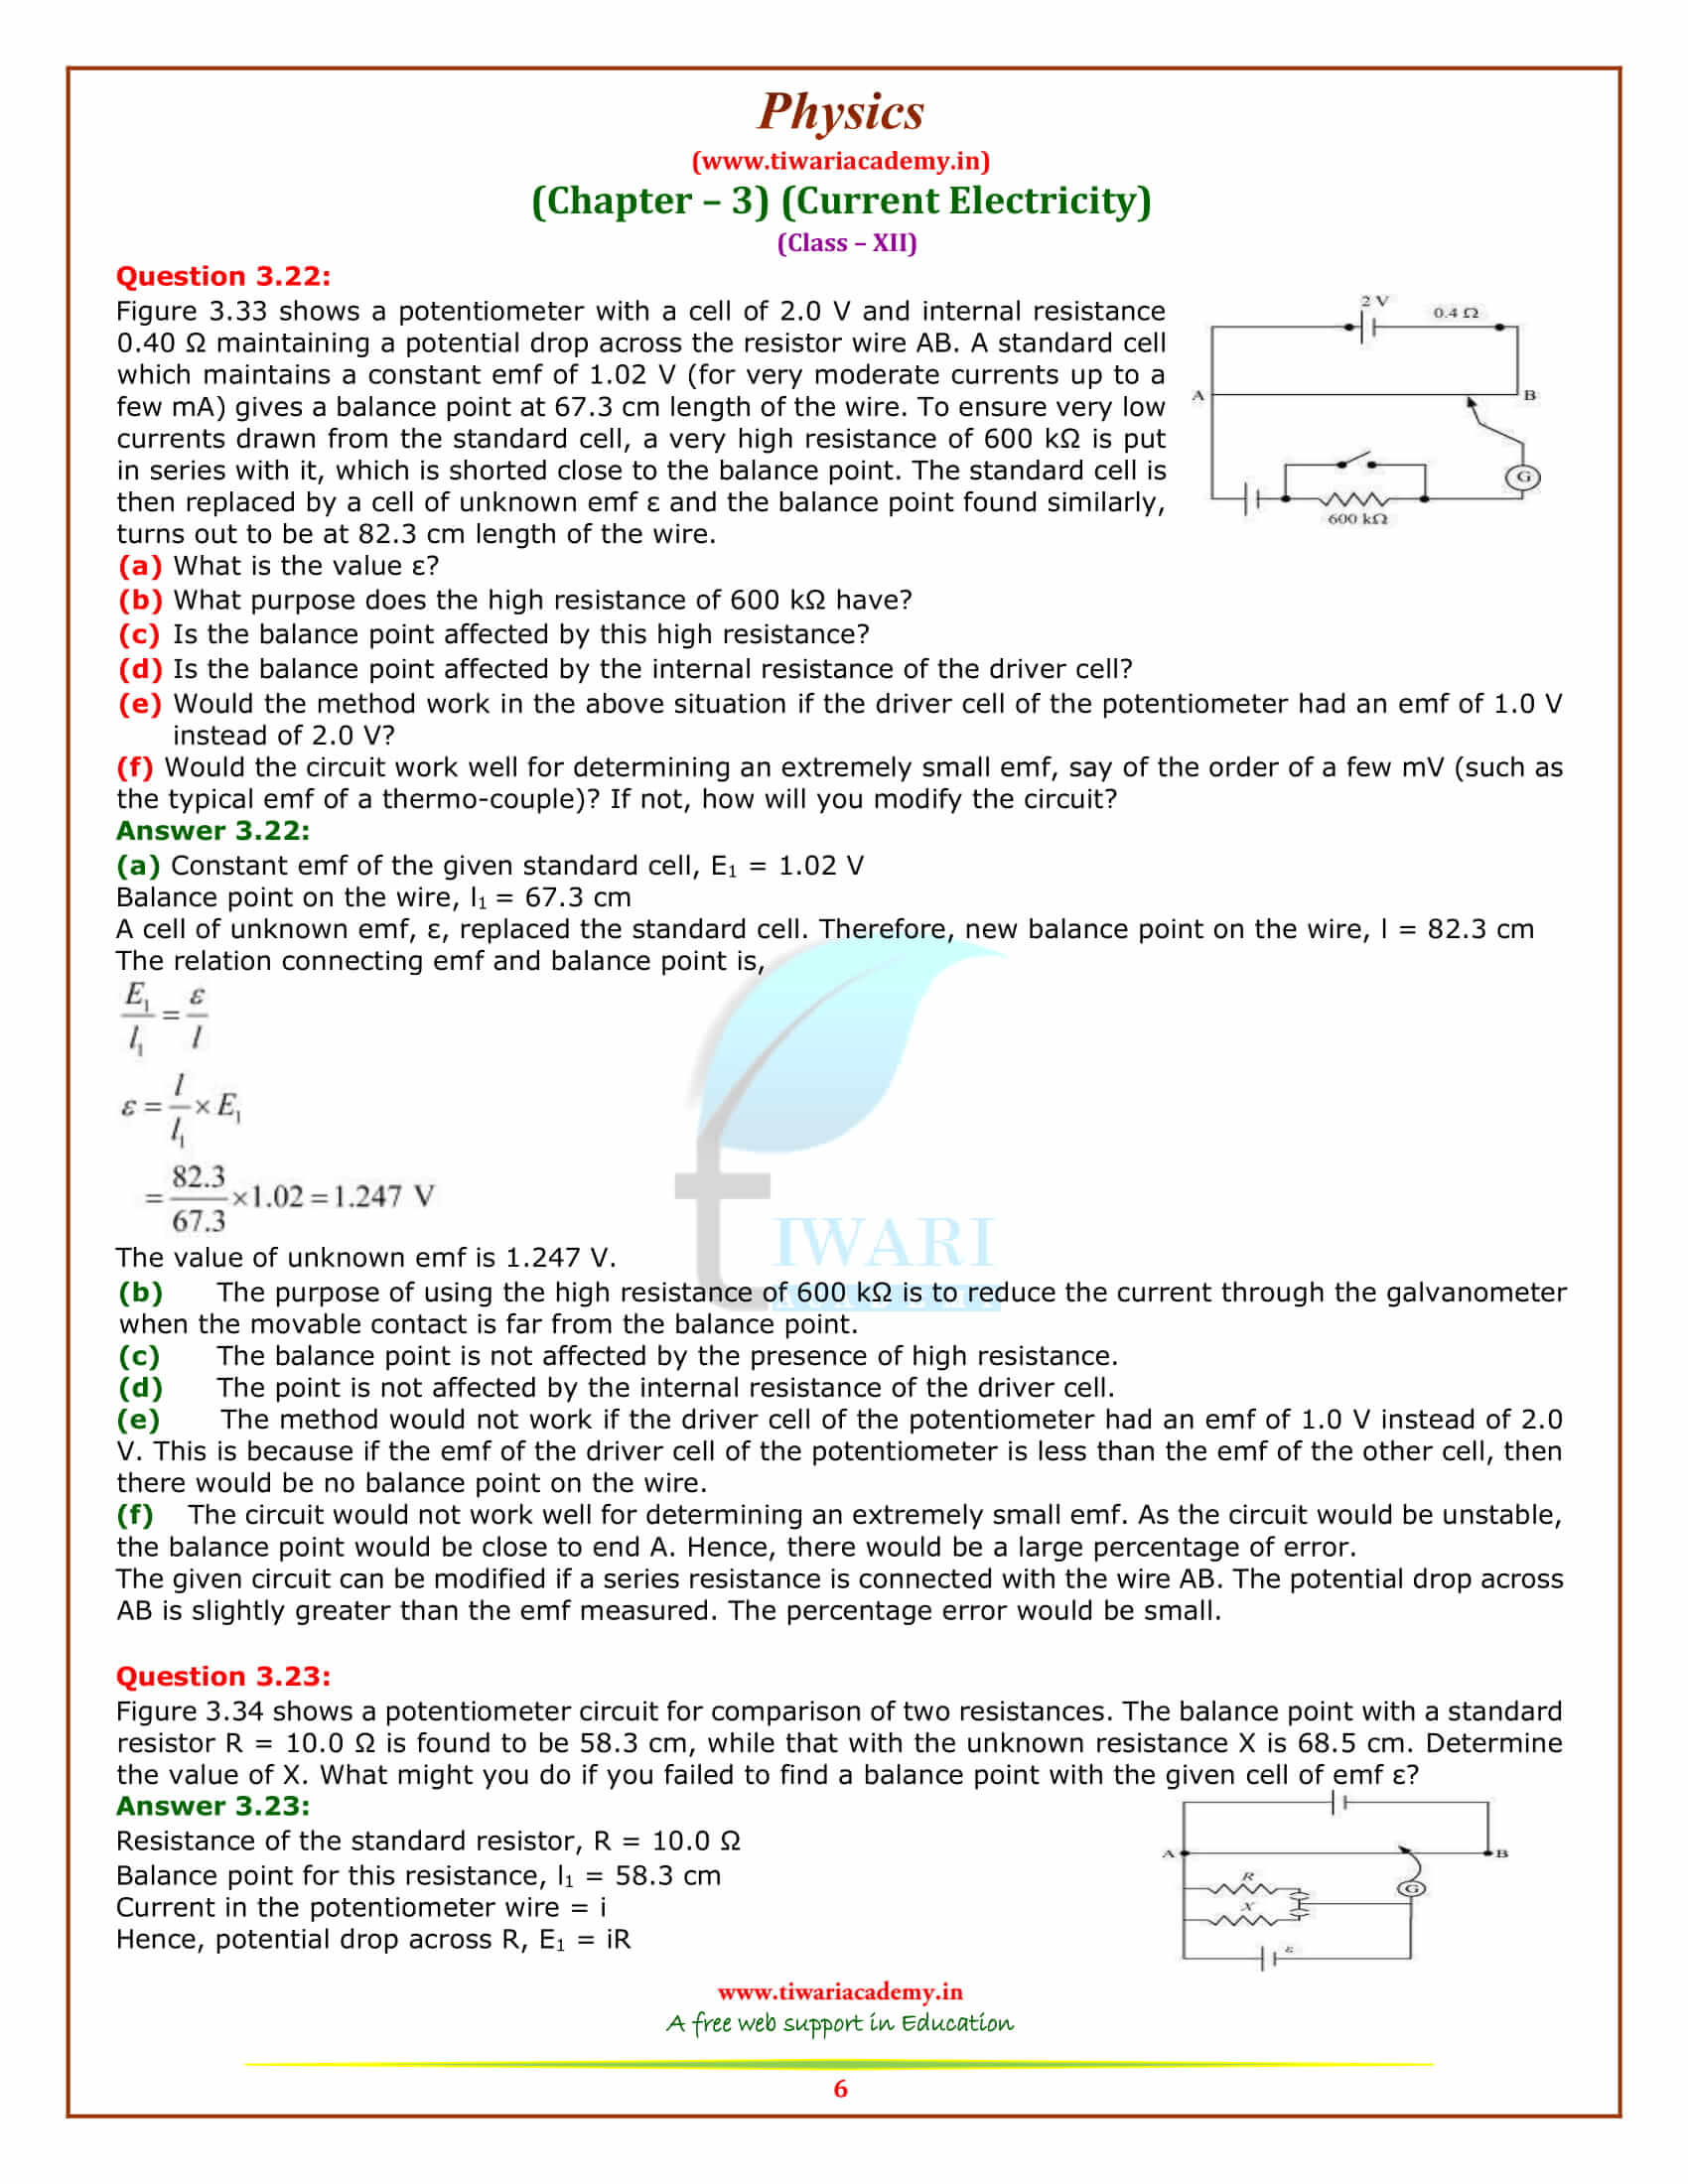 NCERT Solutions for Class 12 Physics Chapter 3 Current Electricity additional exercises free download